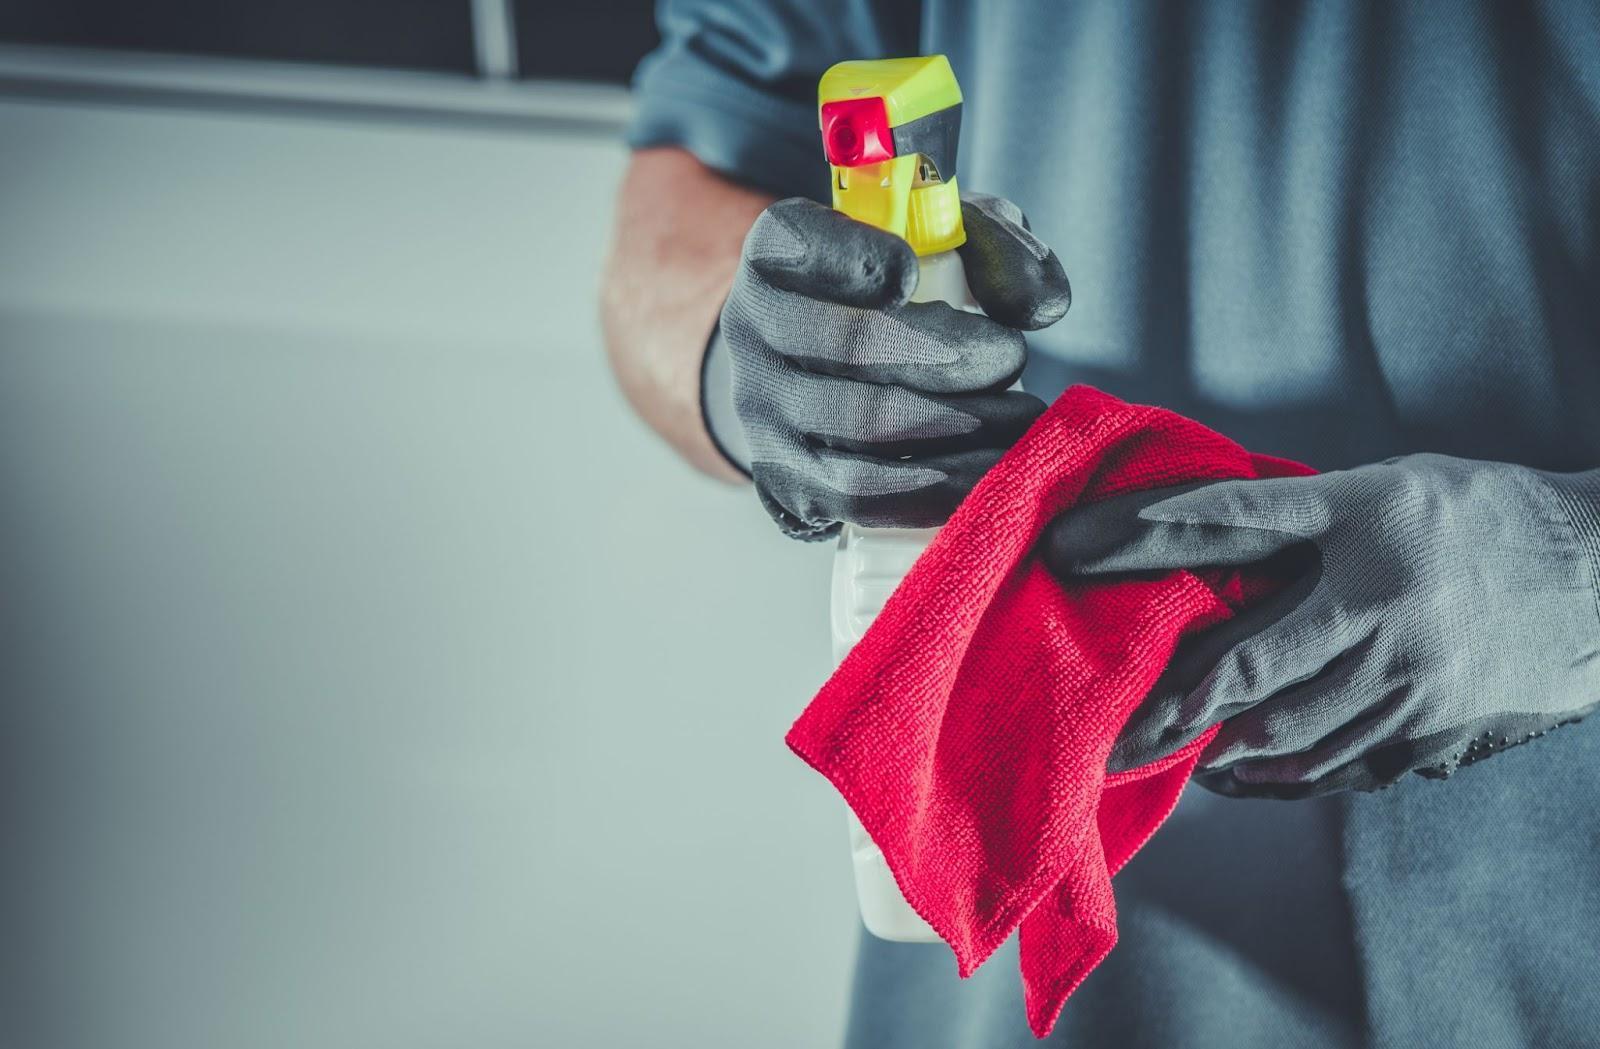 6 Common Types of Chemicals Used for Cleaning